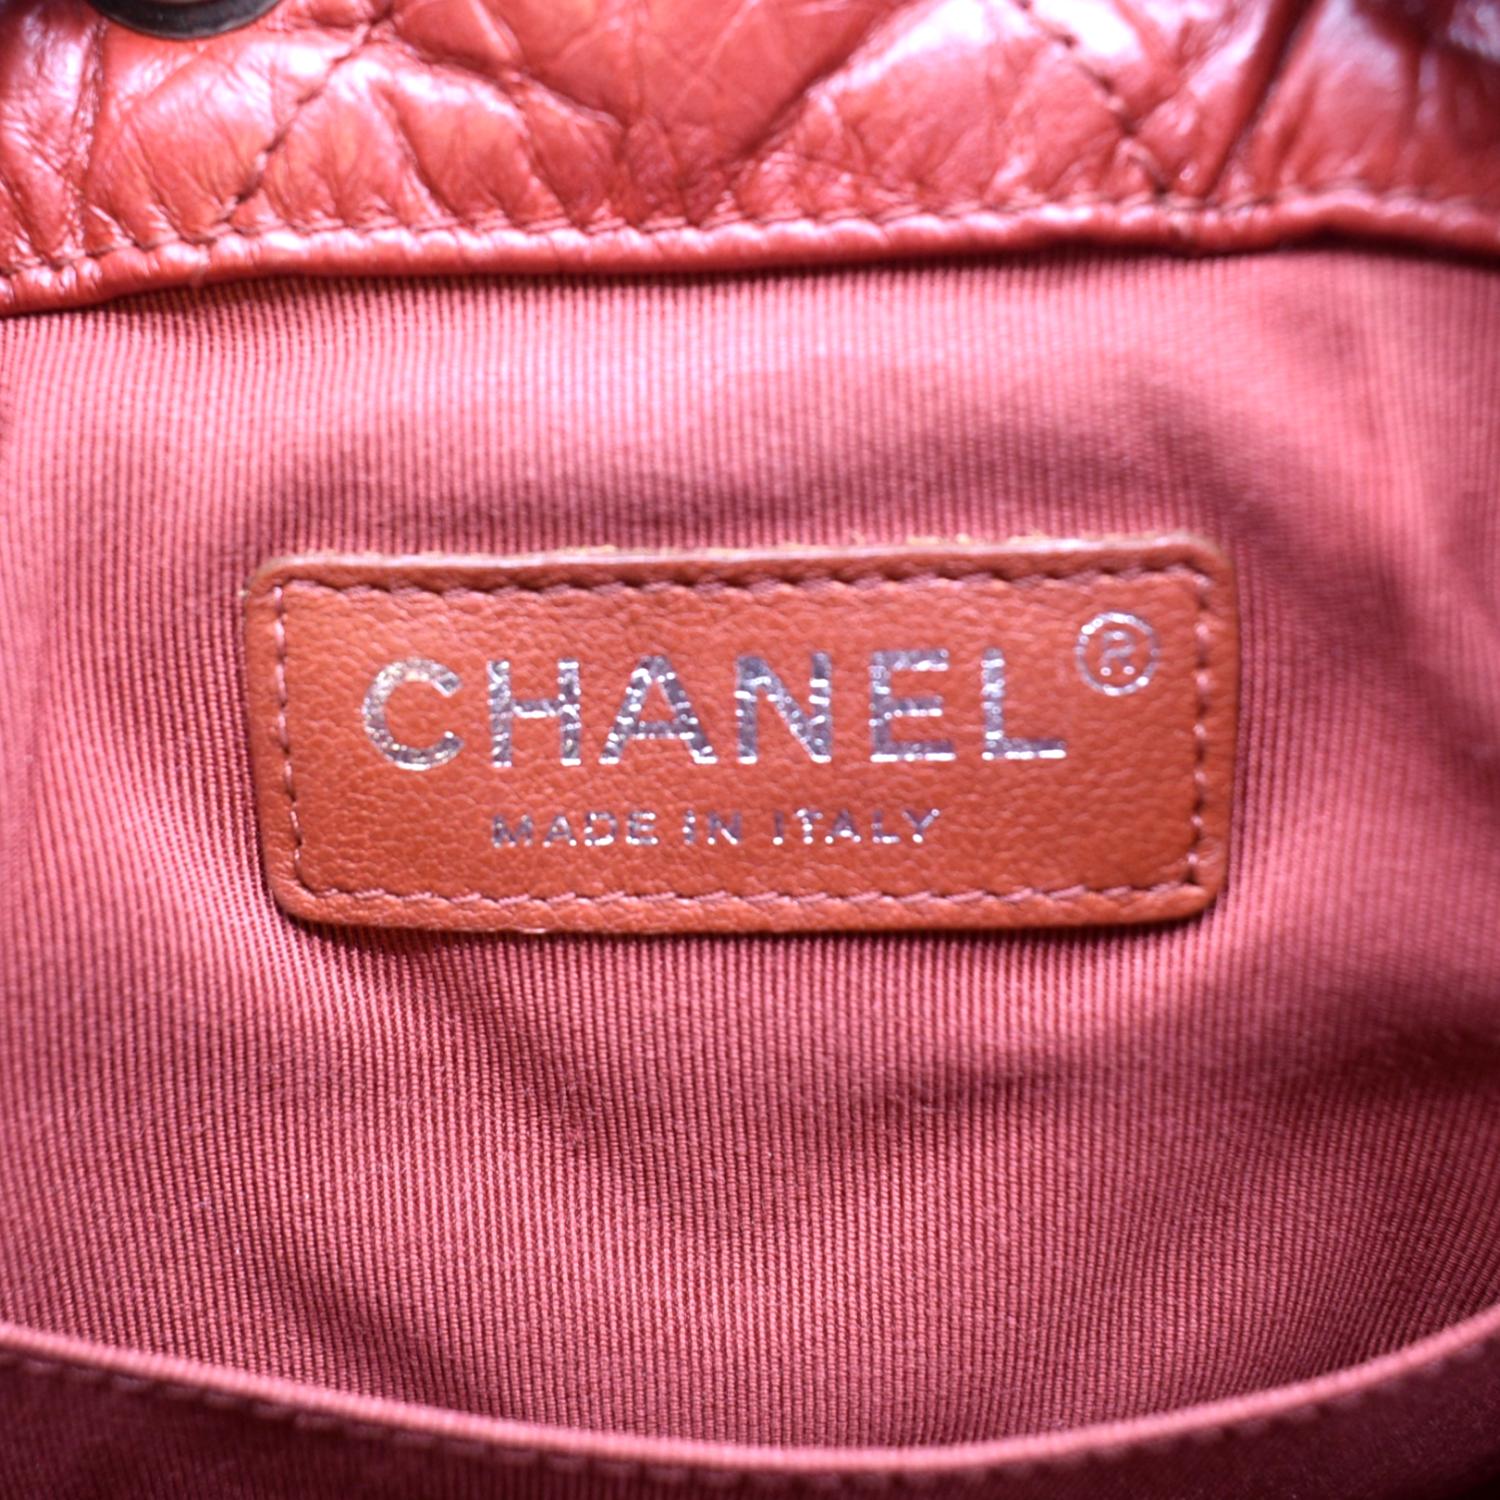 Gabrielle leather backpack Chanel Red in Leather - 35433398